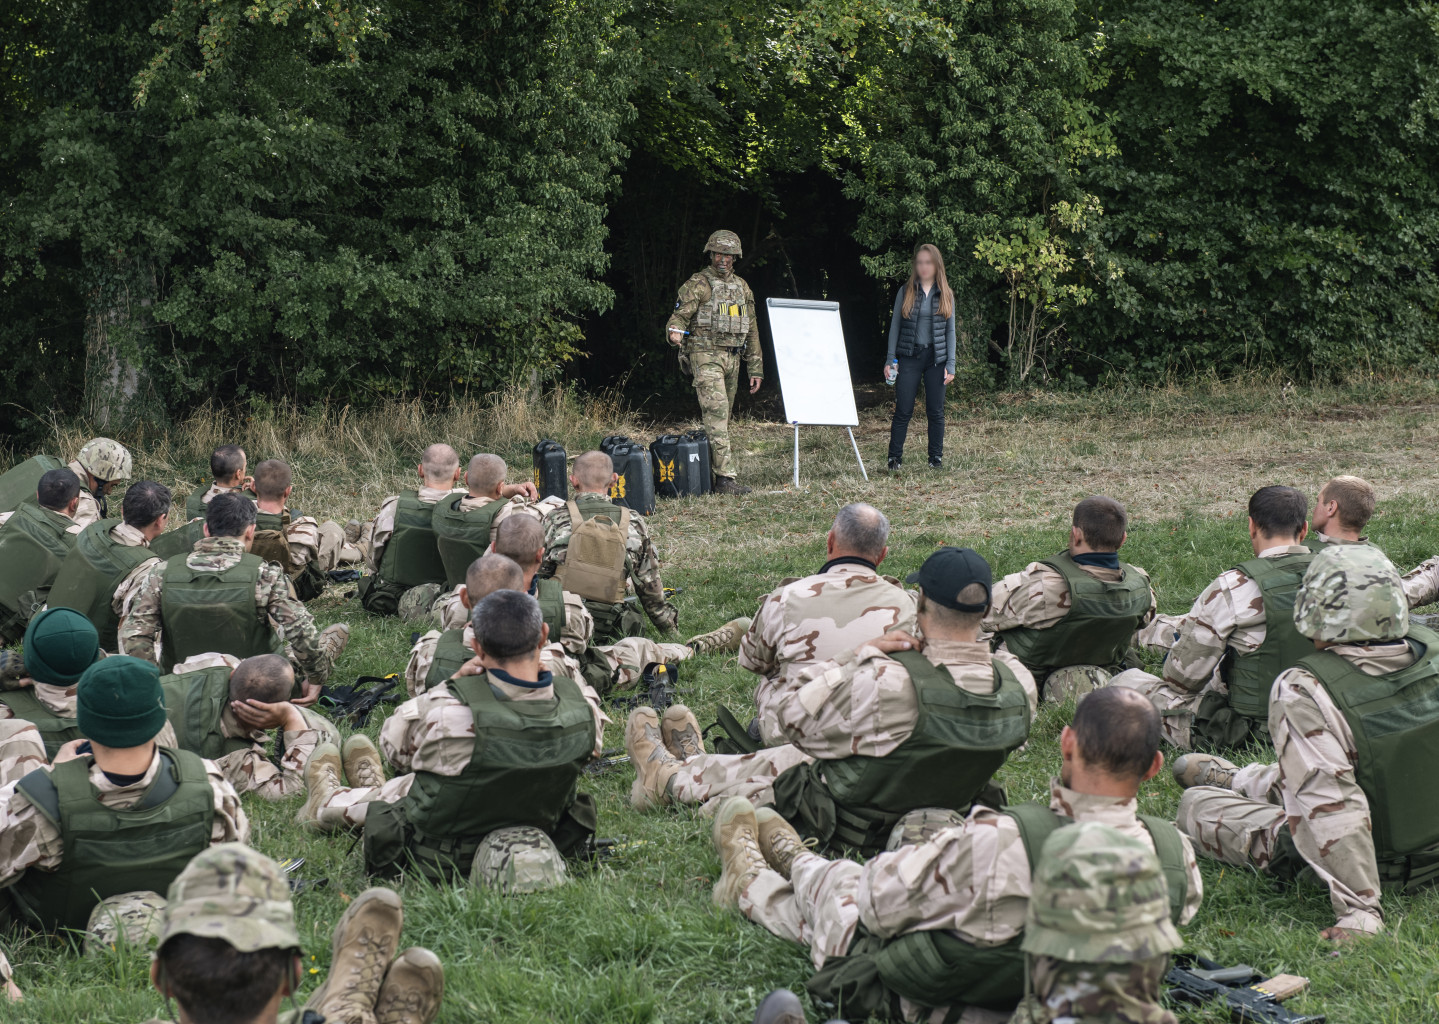 A New Zealand Army soldier presents to Ukrainian recruits in the UK